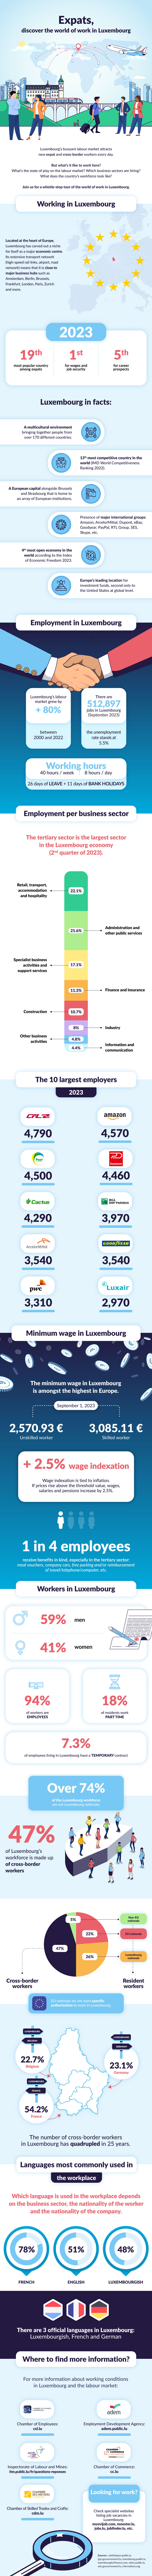 Expats, discover the world of work in Luxembourg